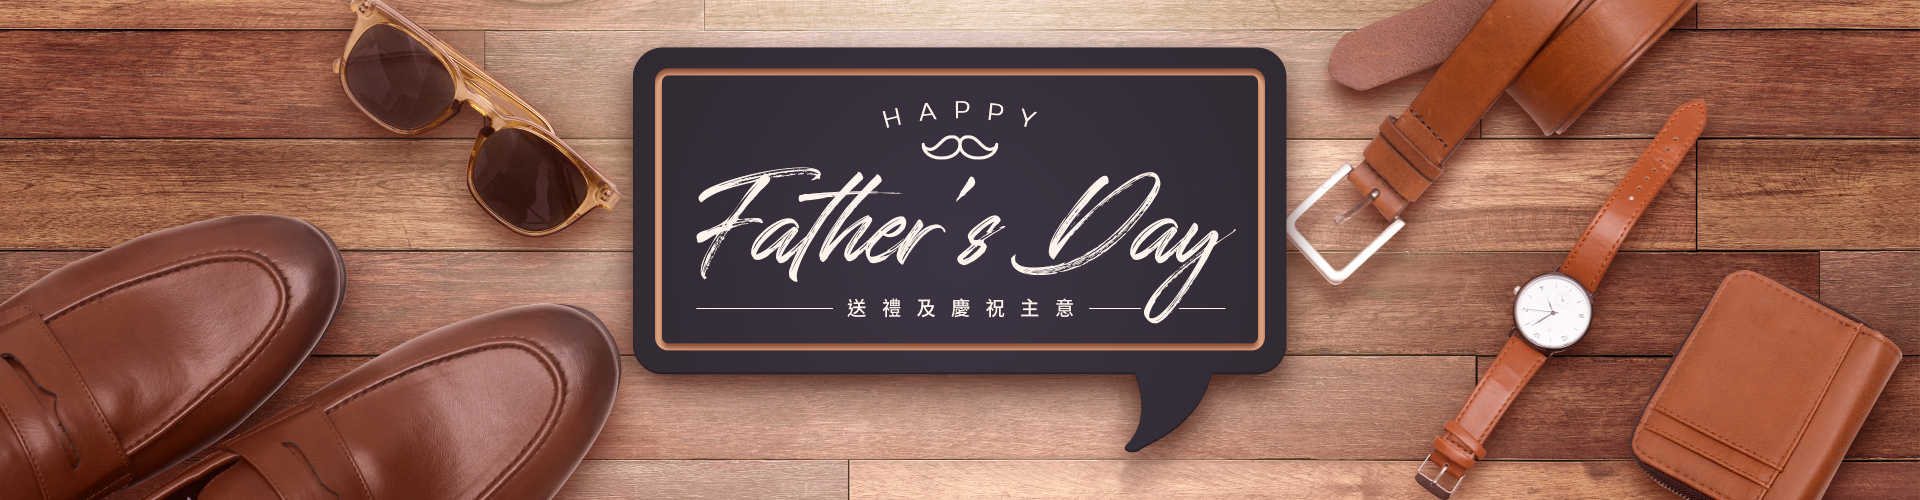 Father's Day 父親節